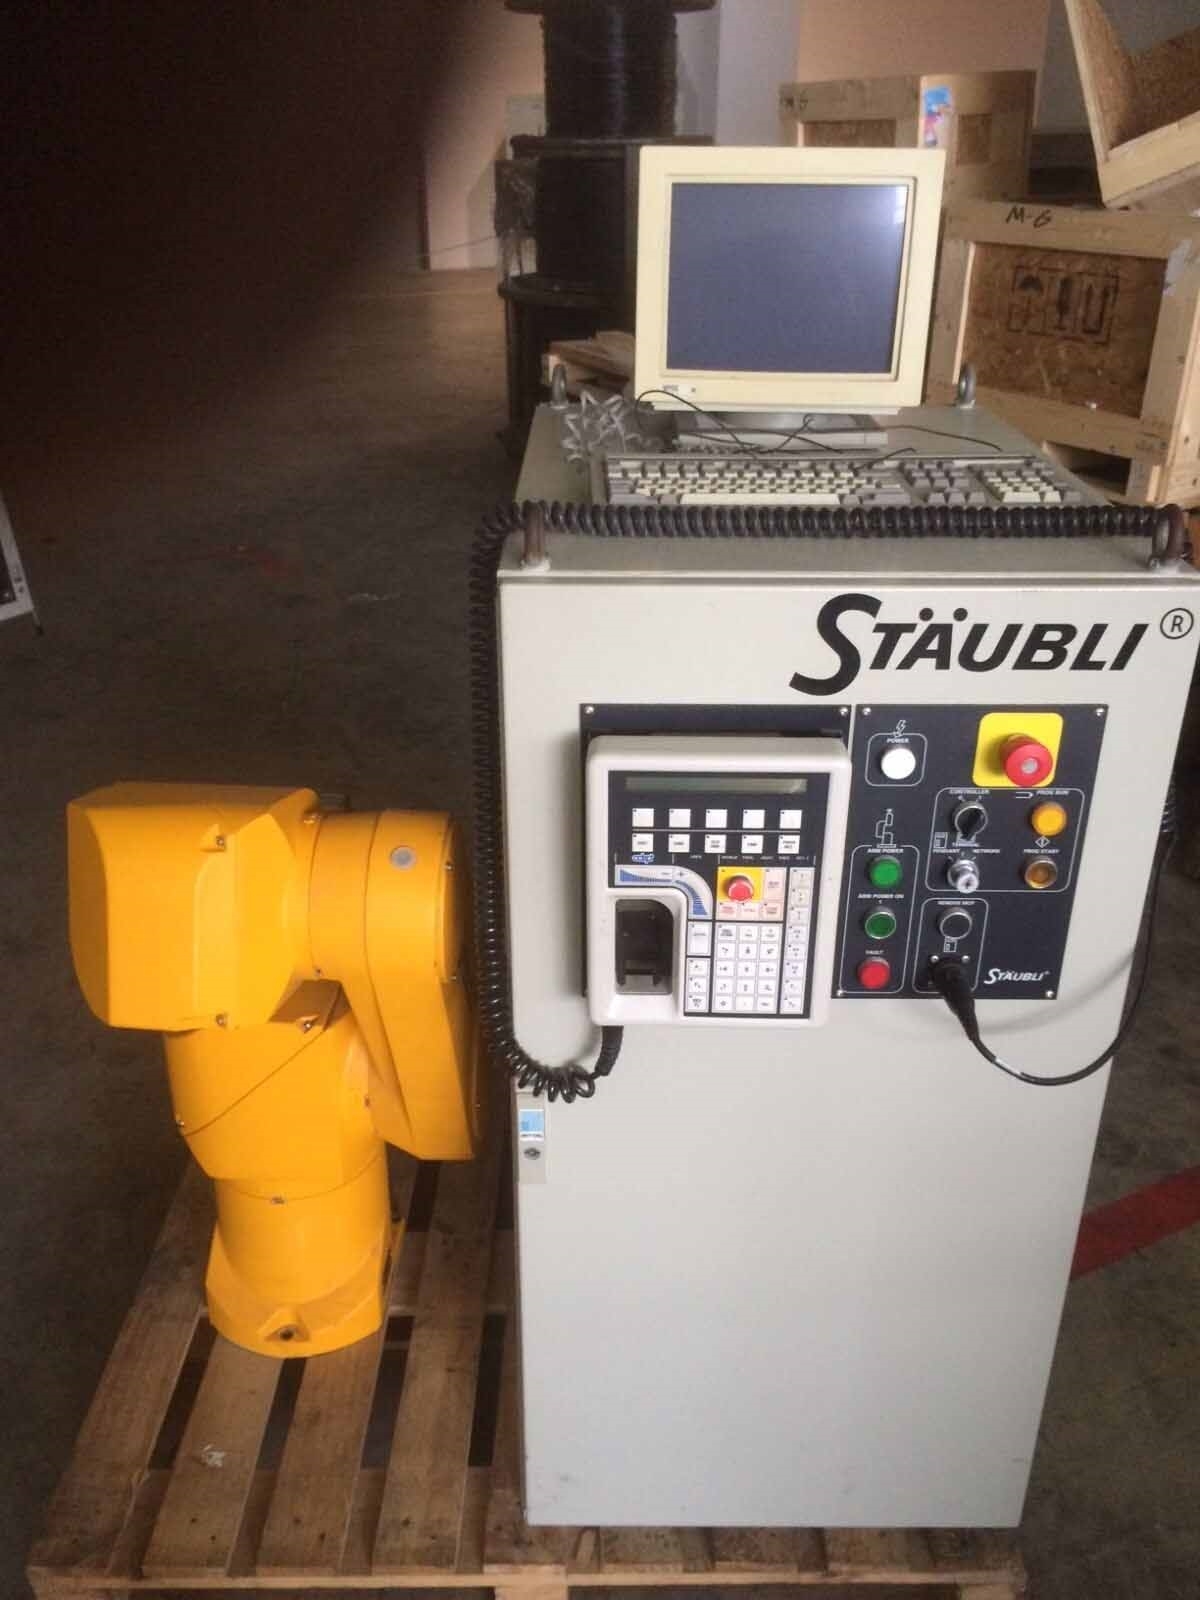 Photo Used STAUBLI RX90 For Sale